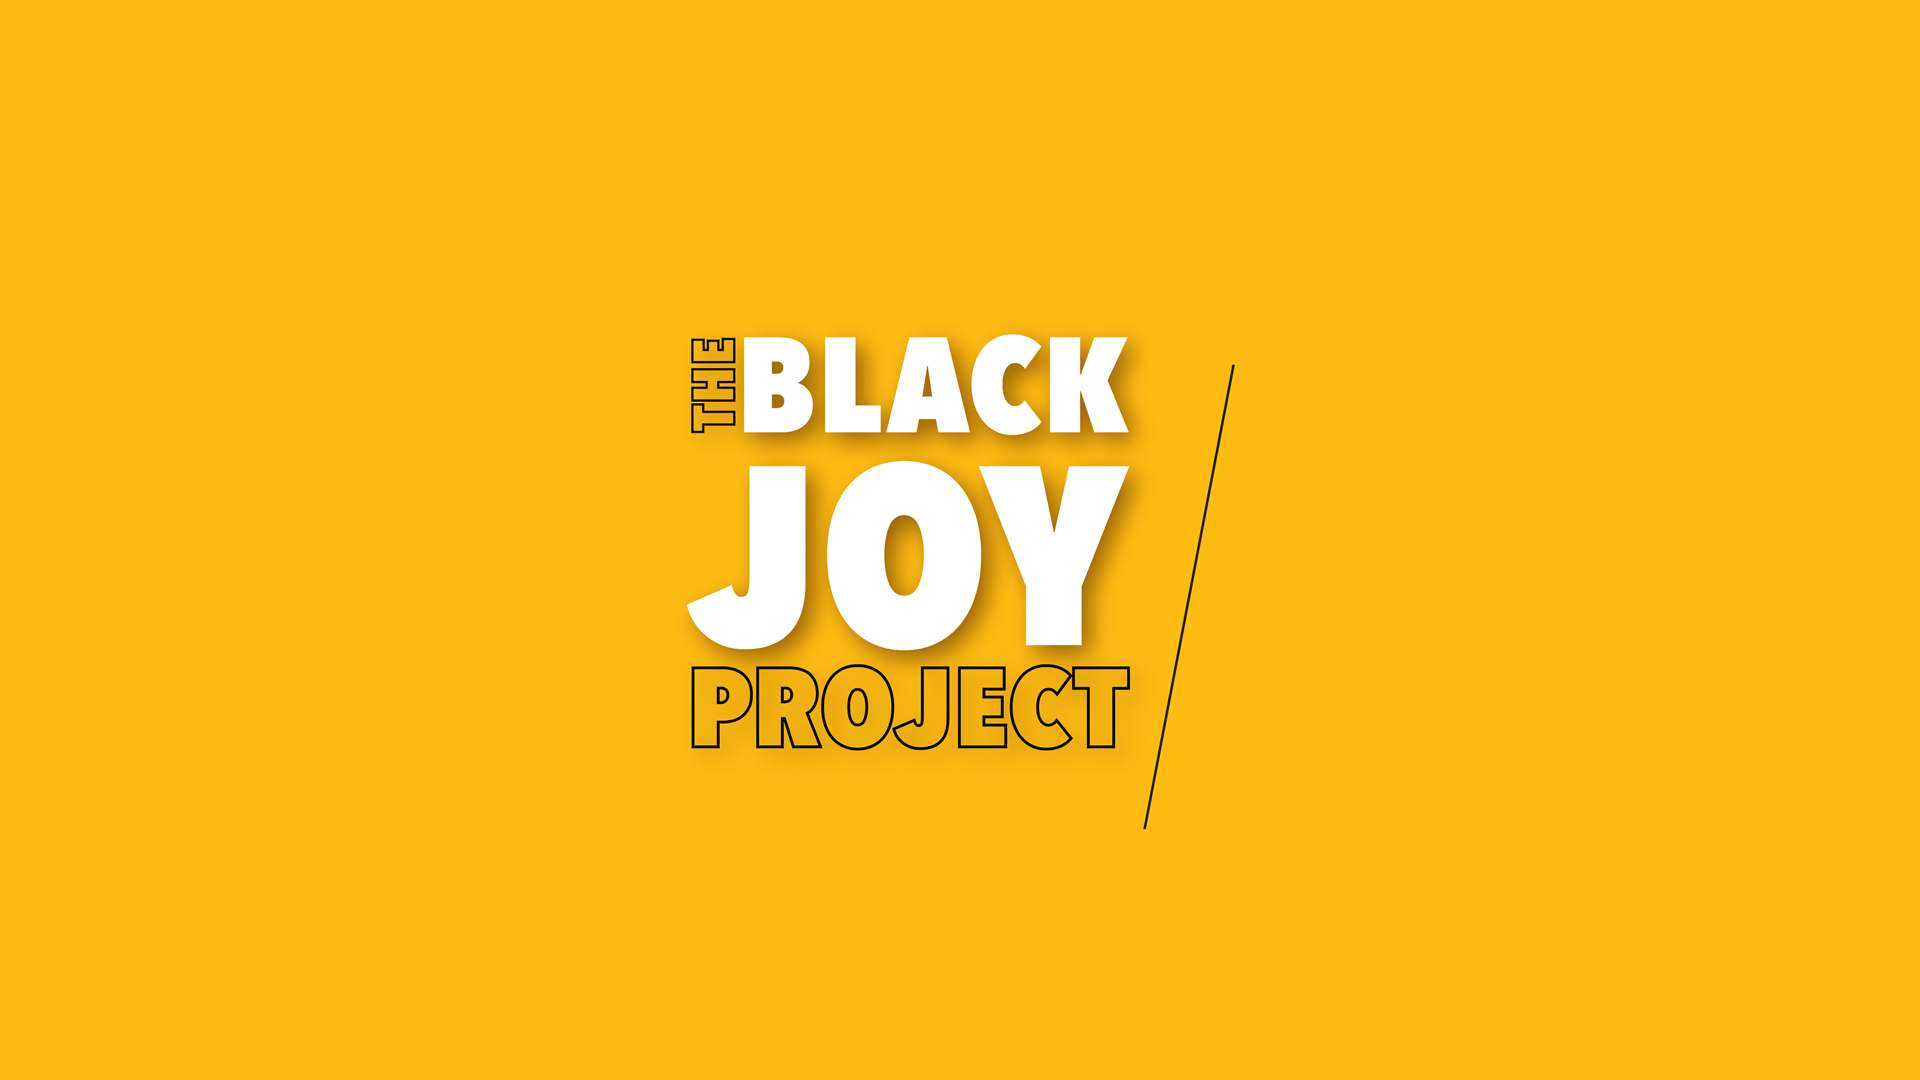 The Black Joy Project wordmark on a mustard colored background